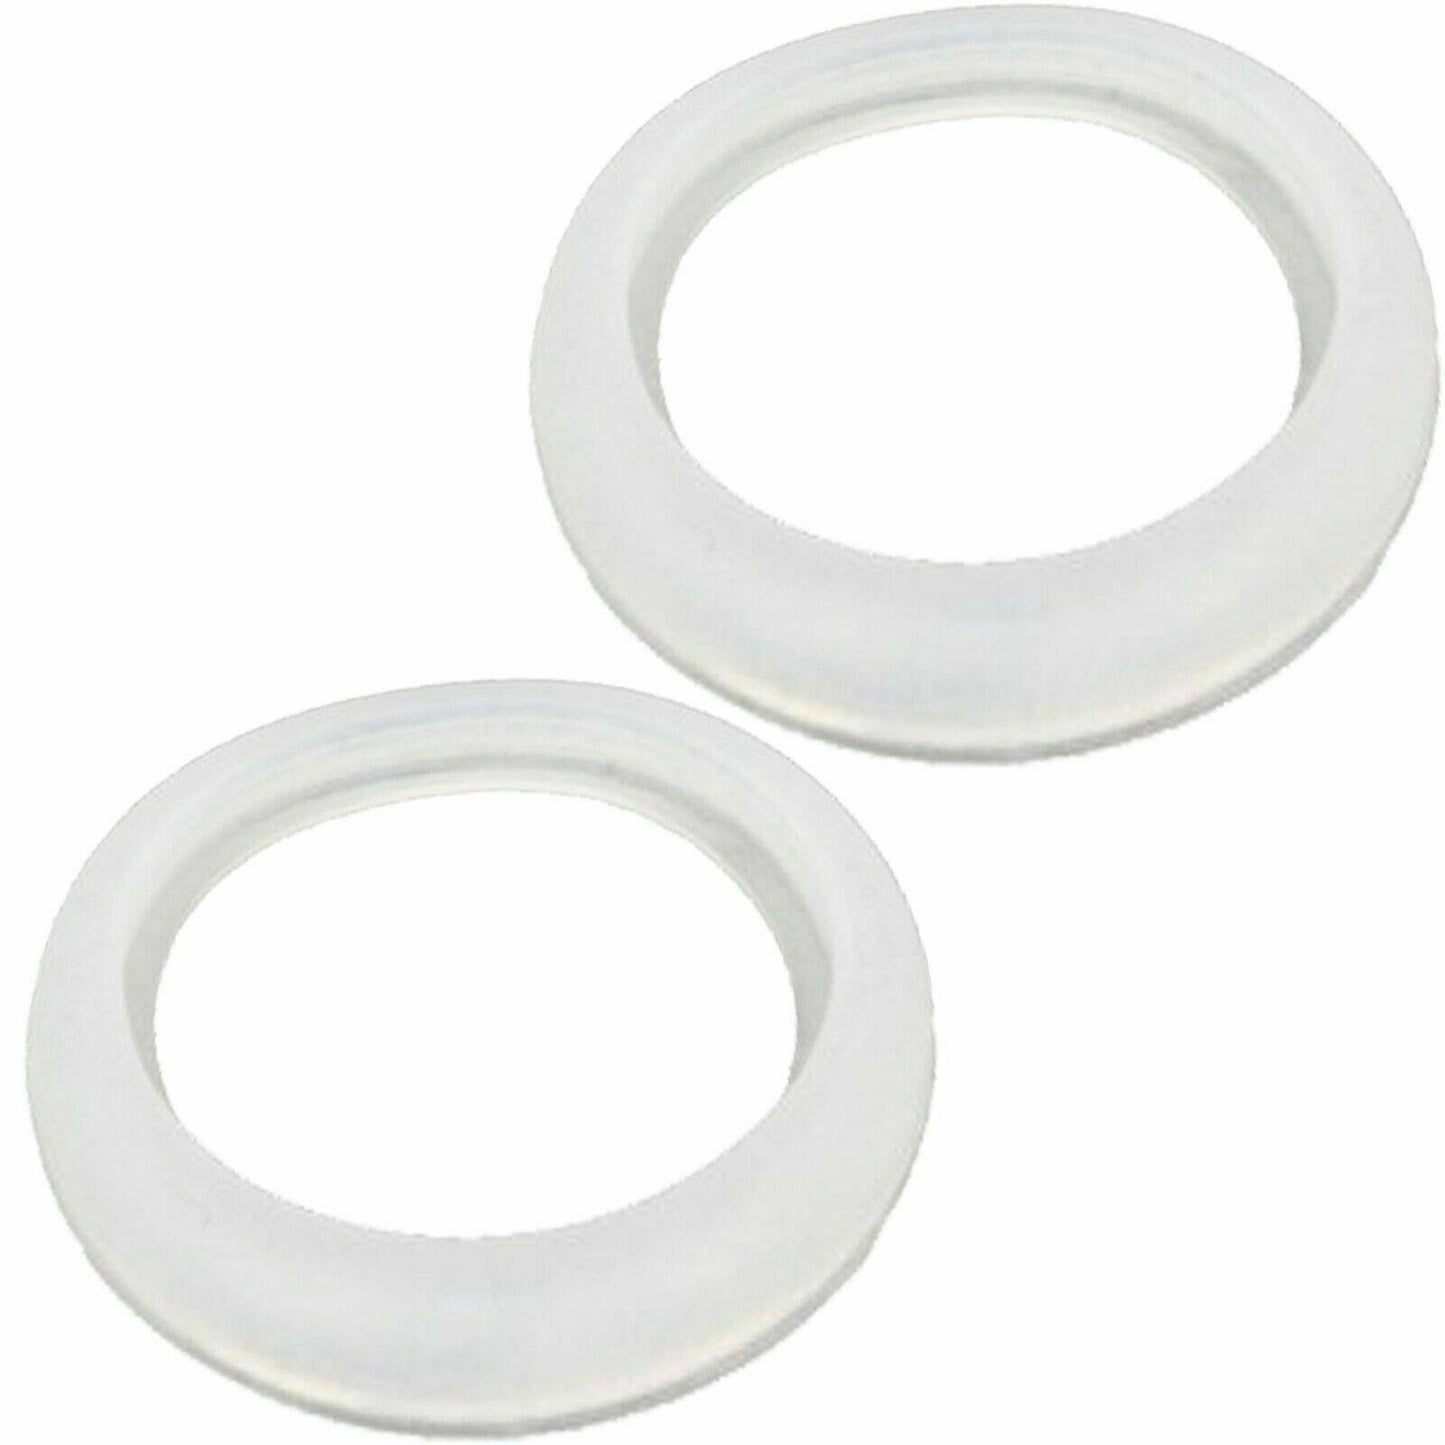 2X silicone seal For Breville Espresso Coffee BES200/62 BES200 BES250 Sparesbarn